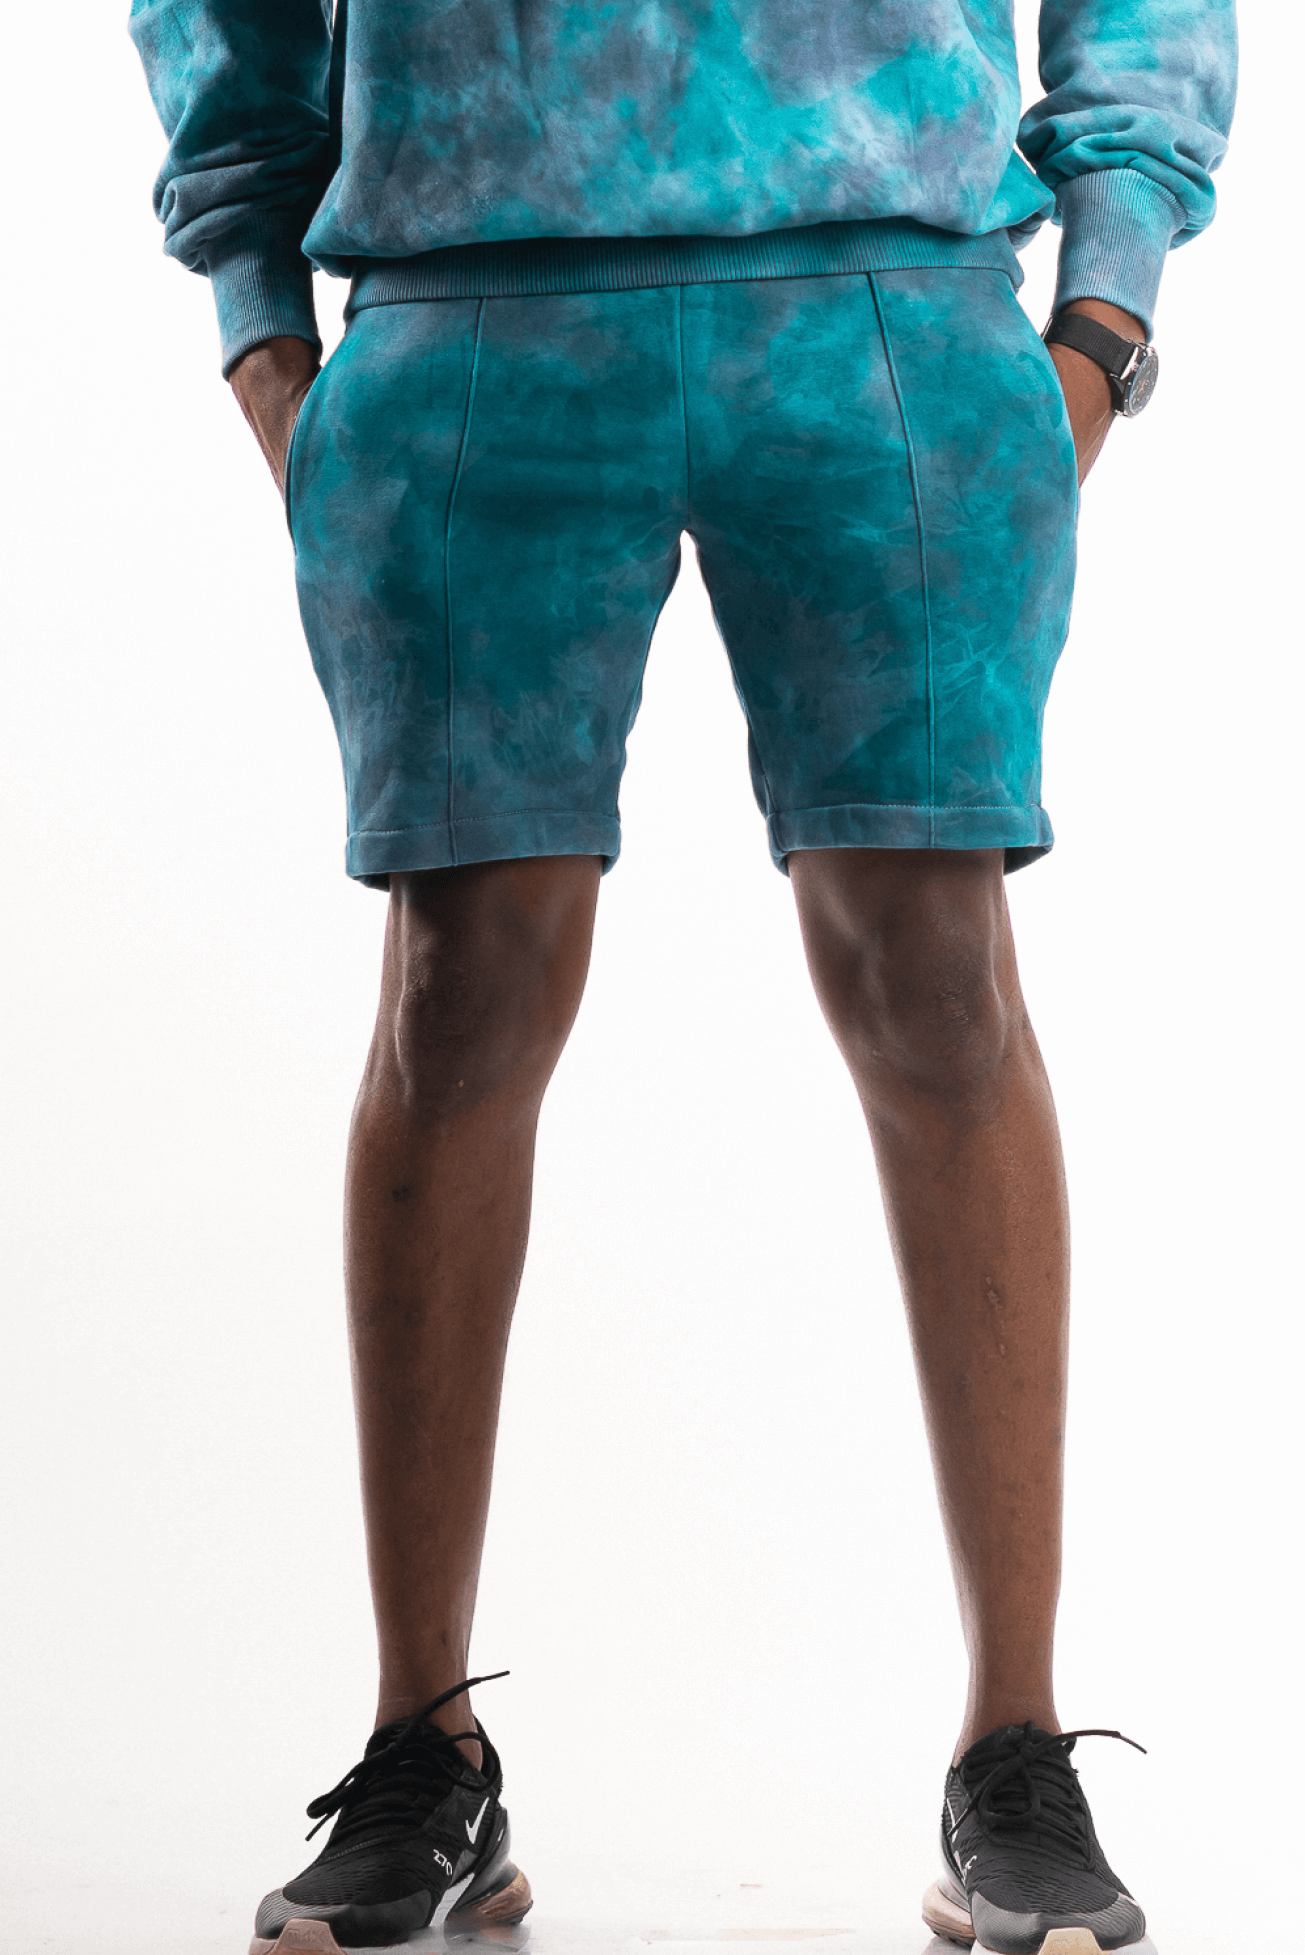 Shop Upeo Shorts (Green & Black Blend) by Regalia Apparel on Arrai. Discover stylish, affordable clothing, jewelry, handbags and unique handmade pieces from top Kenyan & African fashion brands prioritising sustainability and quality craftsmanship.